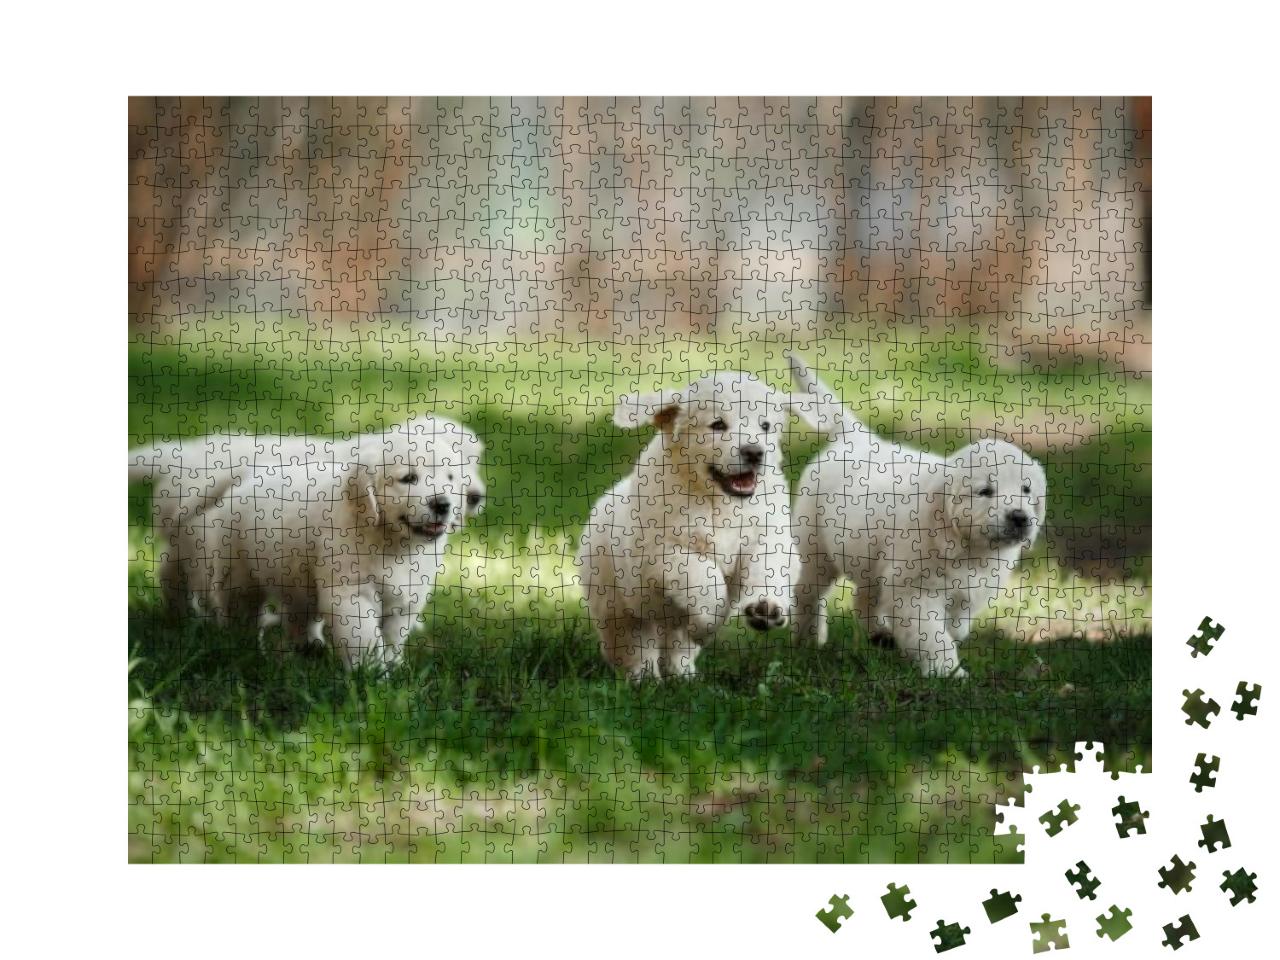 Little Puppies Golden Retriever, Running Around, Playing... Jigsaw Puzzle with 1000 pieces